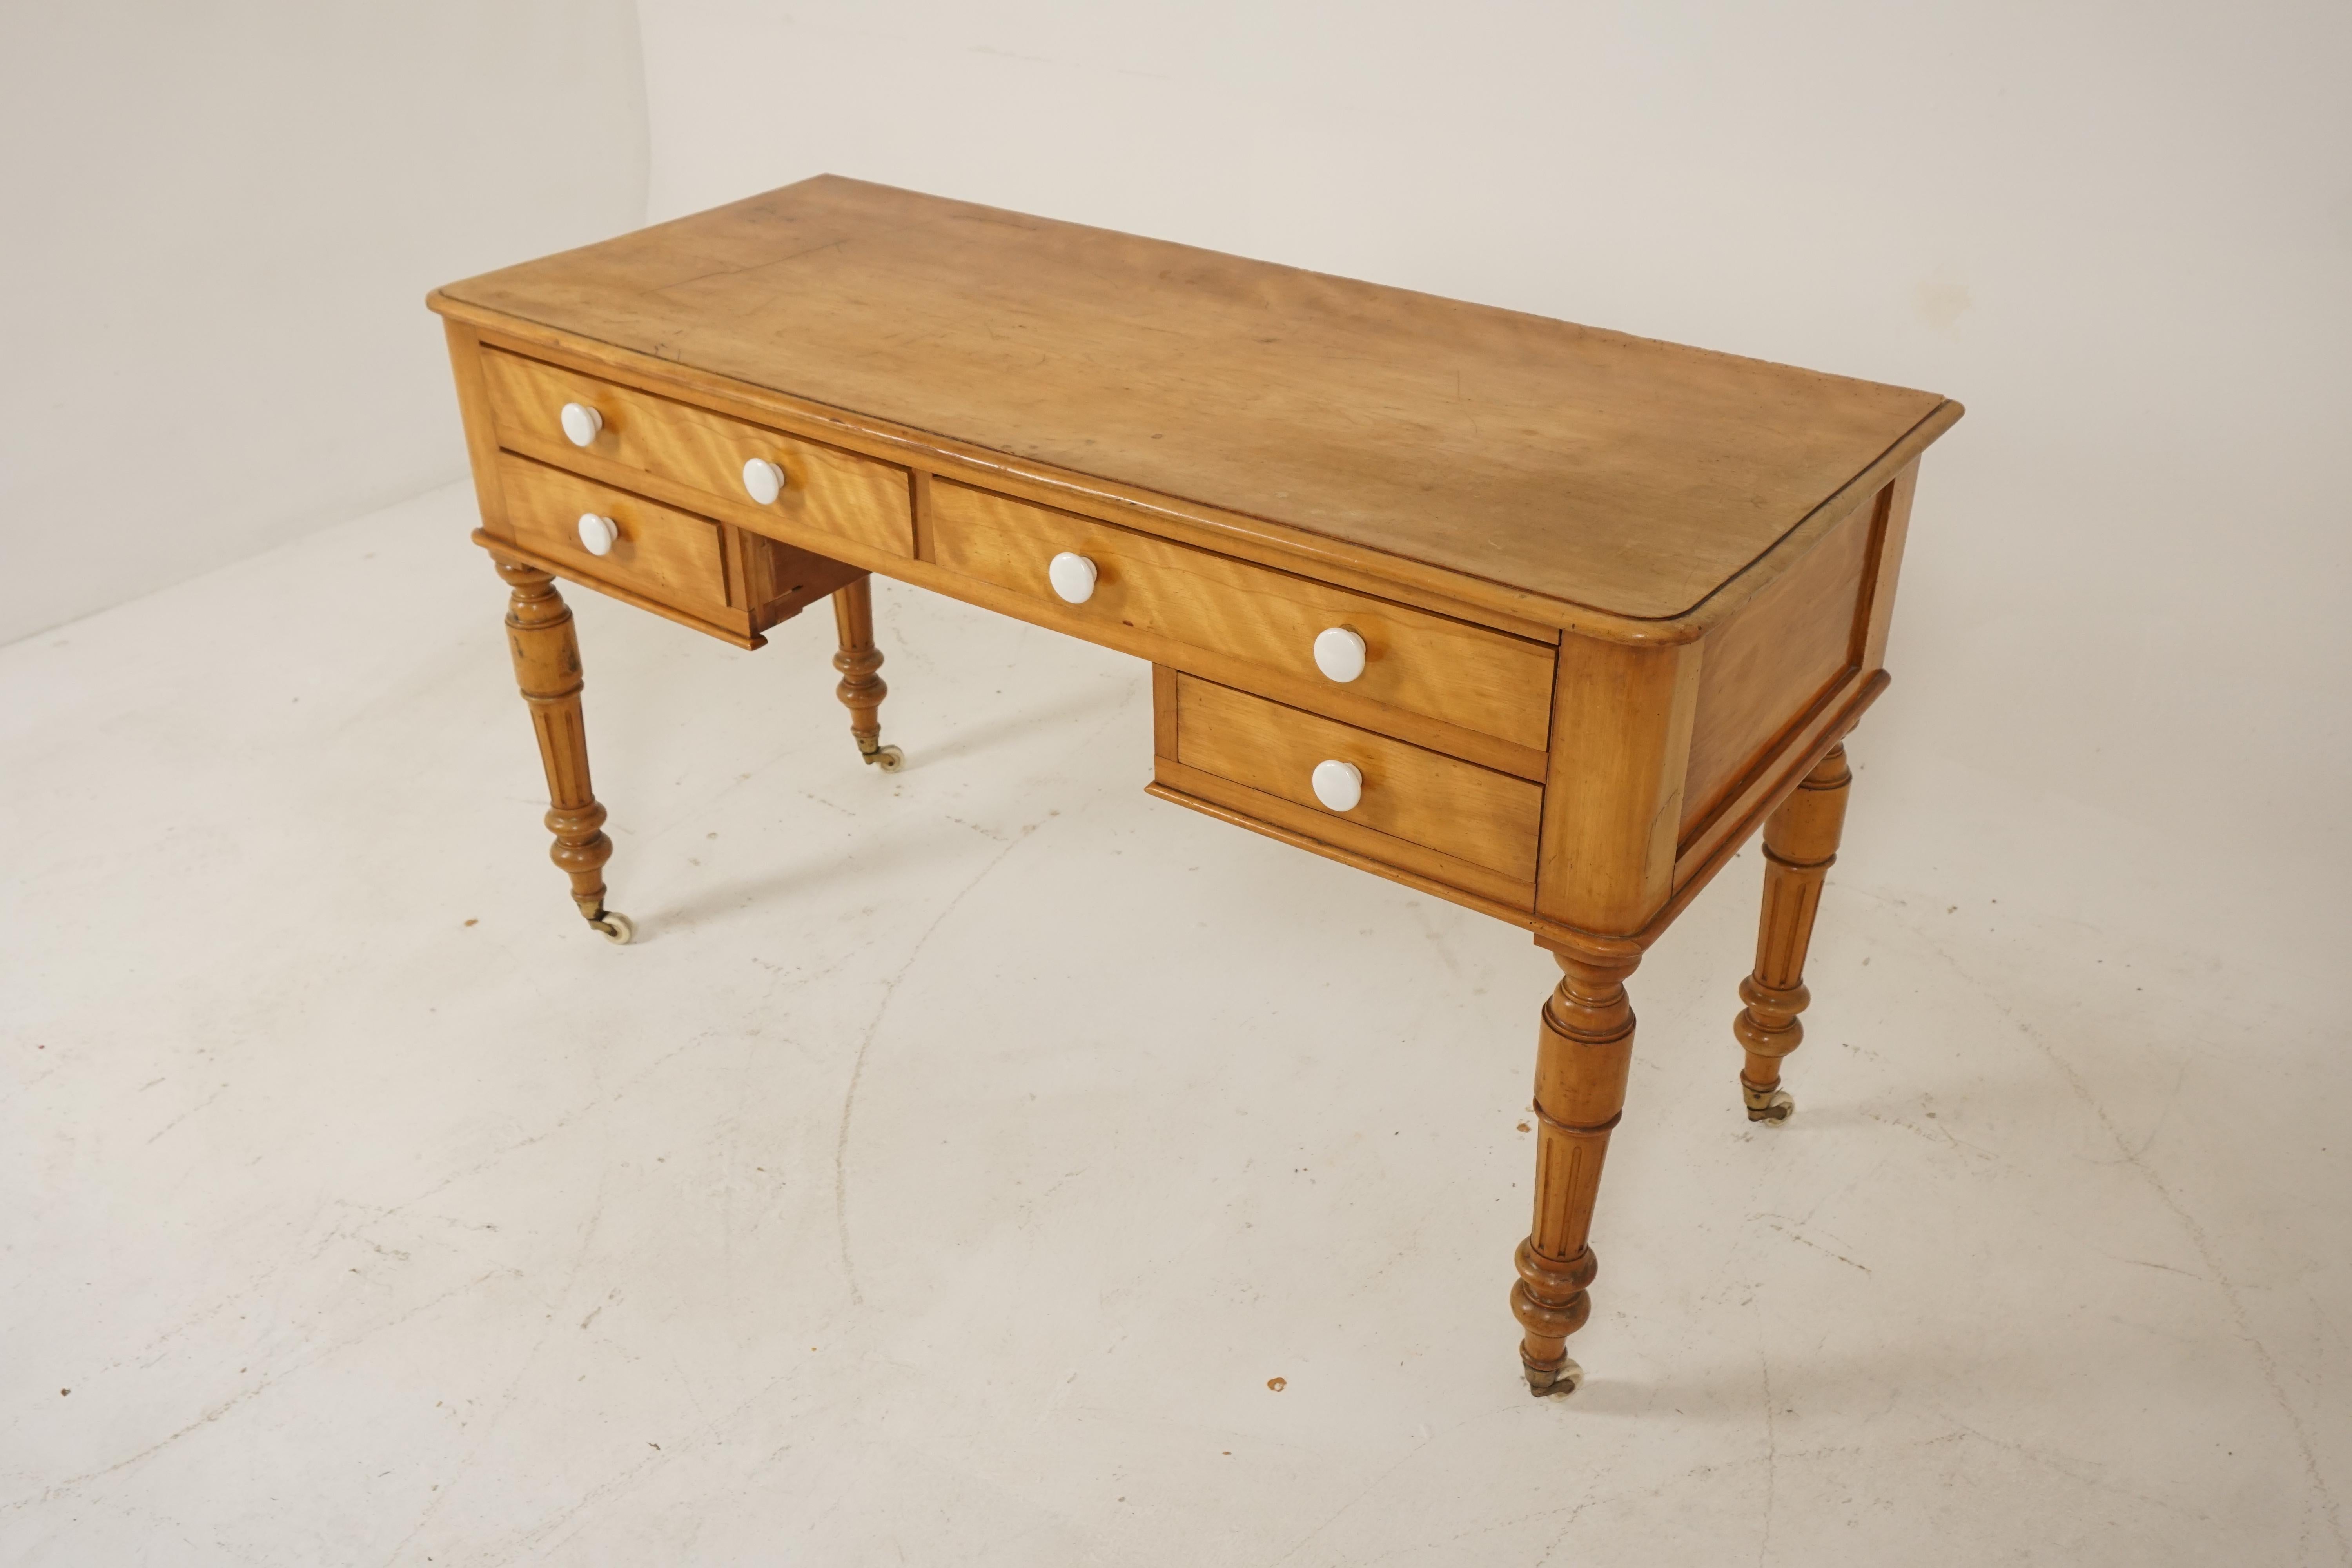 Antique Victorian Table, Satin Birch, Writing Desk, Scotland 1880s, H206

Scotland 1880s
Satin birch
Original finish
Rectangular moulded top
Pair of two long and two short dovetailed drawers with porcelain knobs
All standing on fluted legs with